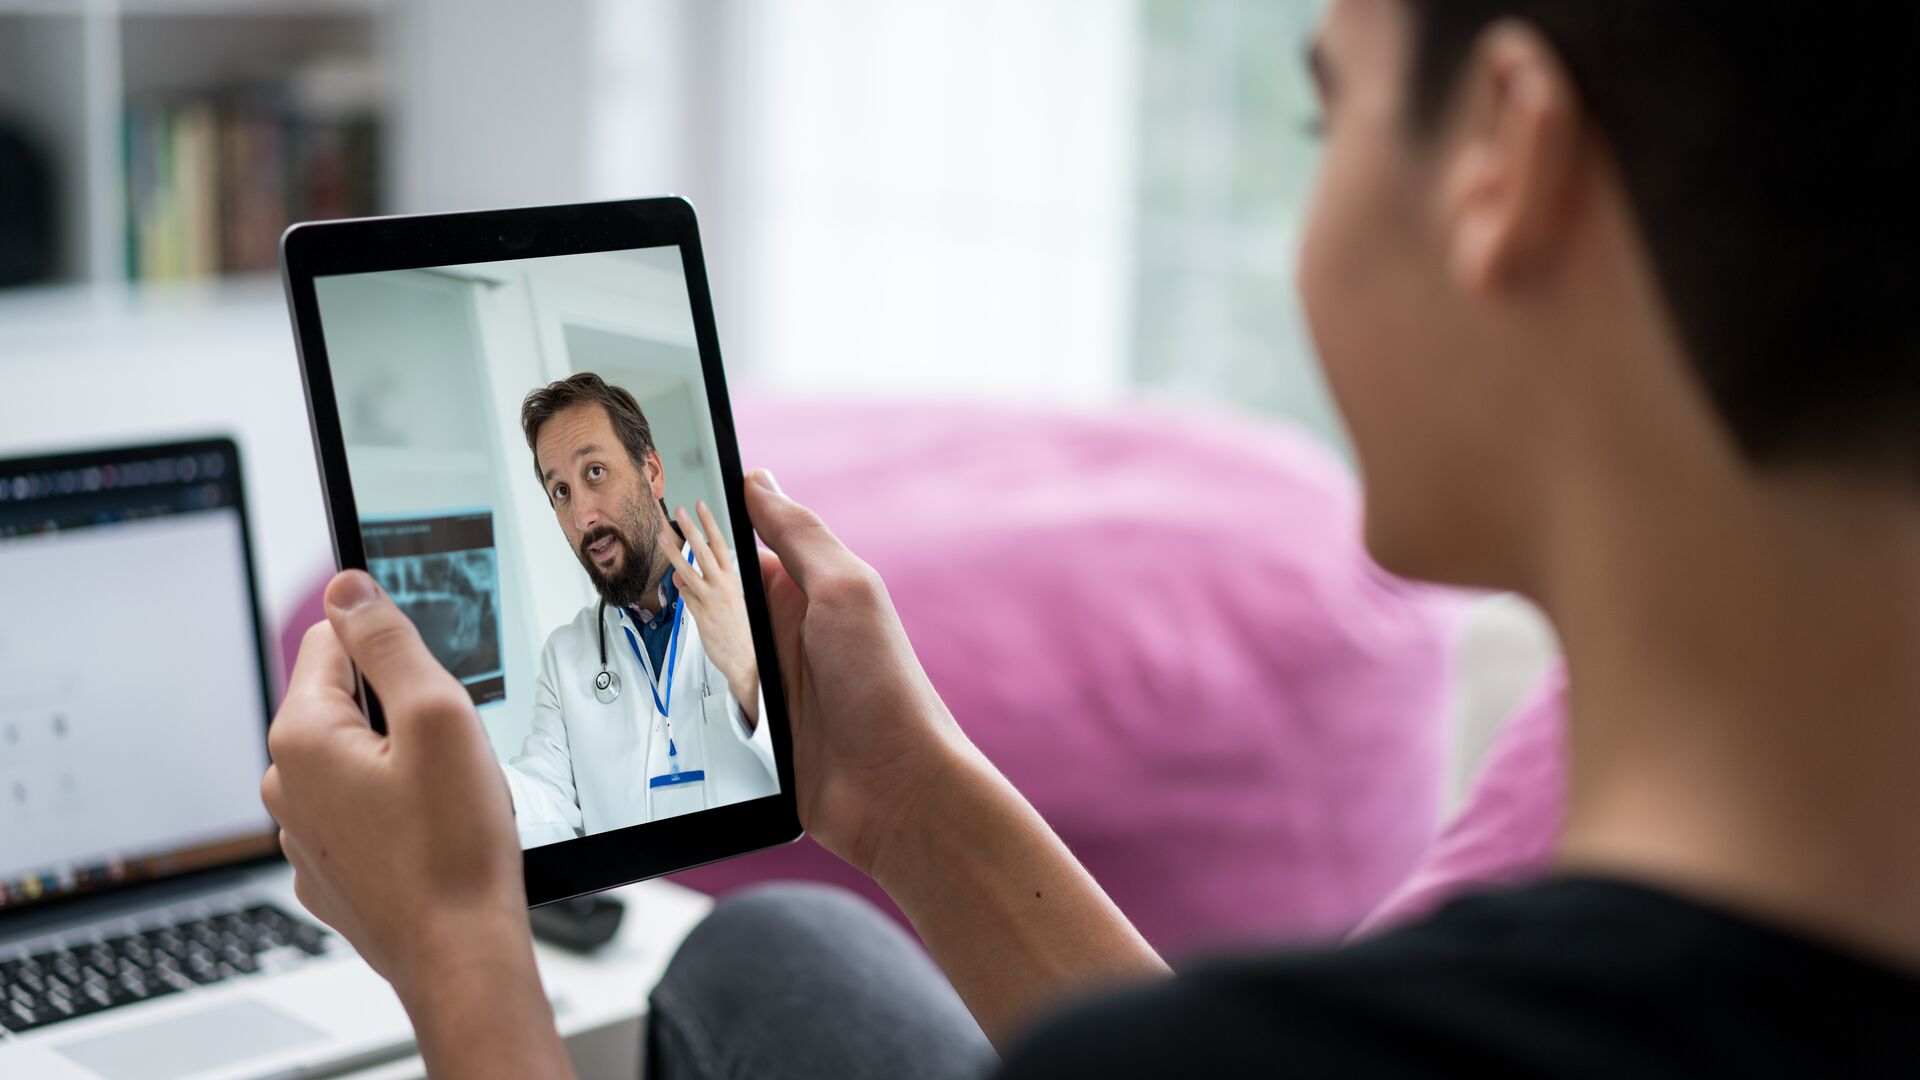 Does Telehealth In Australia Have A Promising Post Pandemic Future